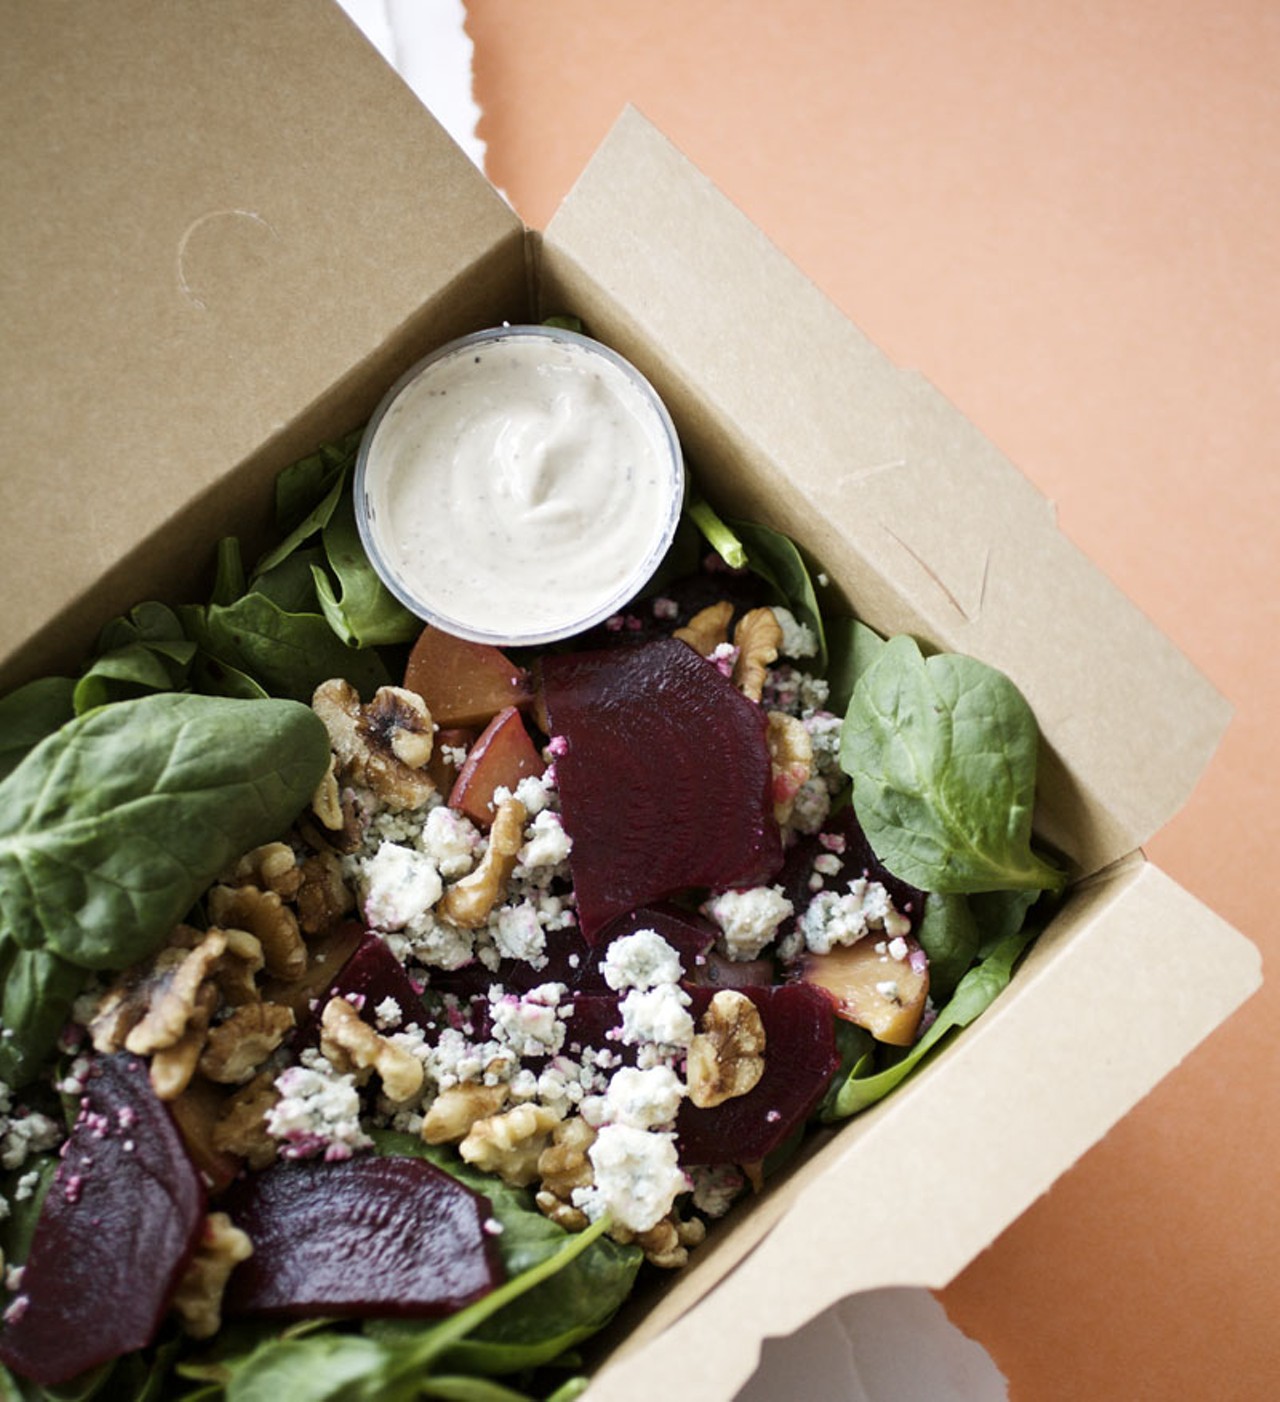 The Just Beet It salad is made with salted roasted beets, oven dried peaches, blue cheese crumbles, toasted walnuts & baby spinach with a sherry-walnut vinaigrette.